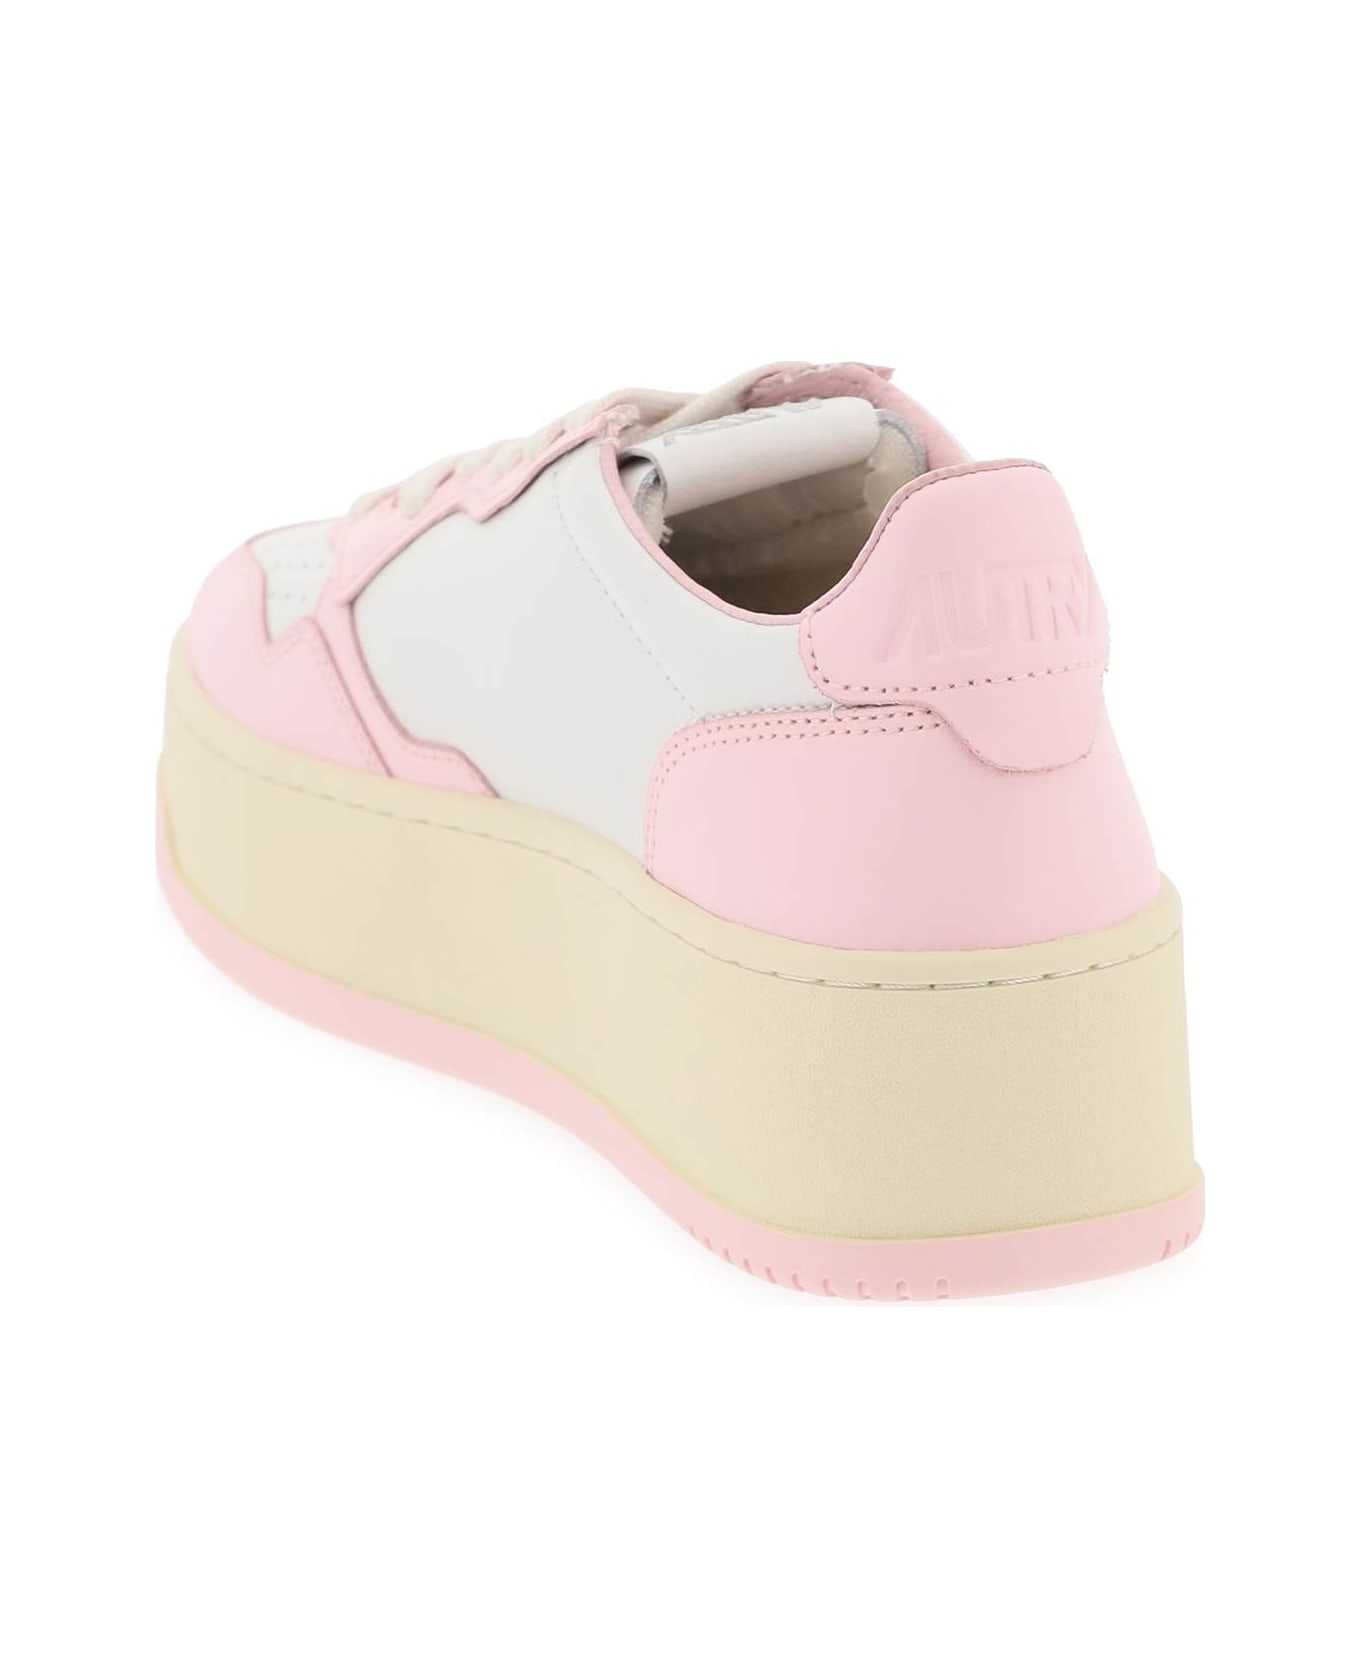 Autry Medalist Low Sneakers - Rosa ウェッジシューズ